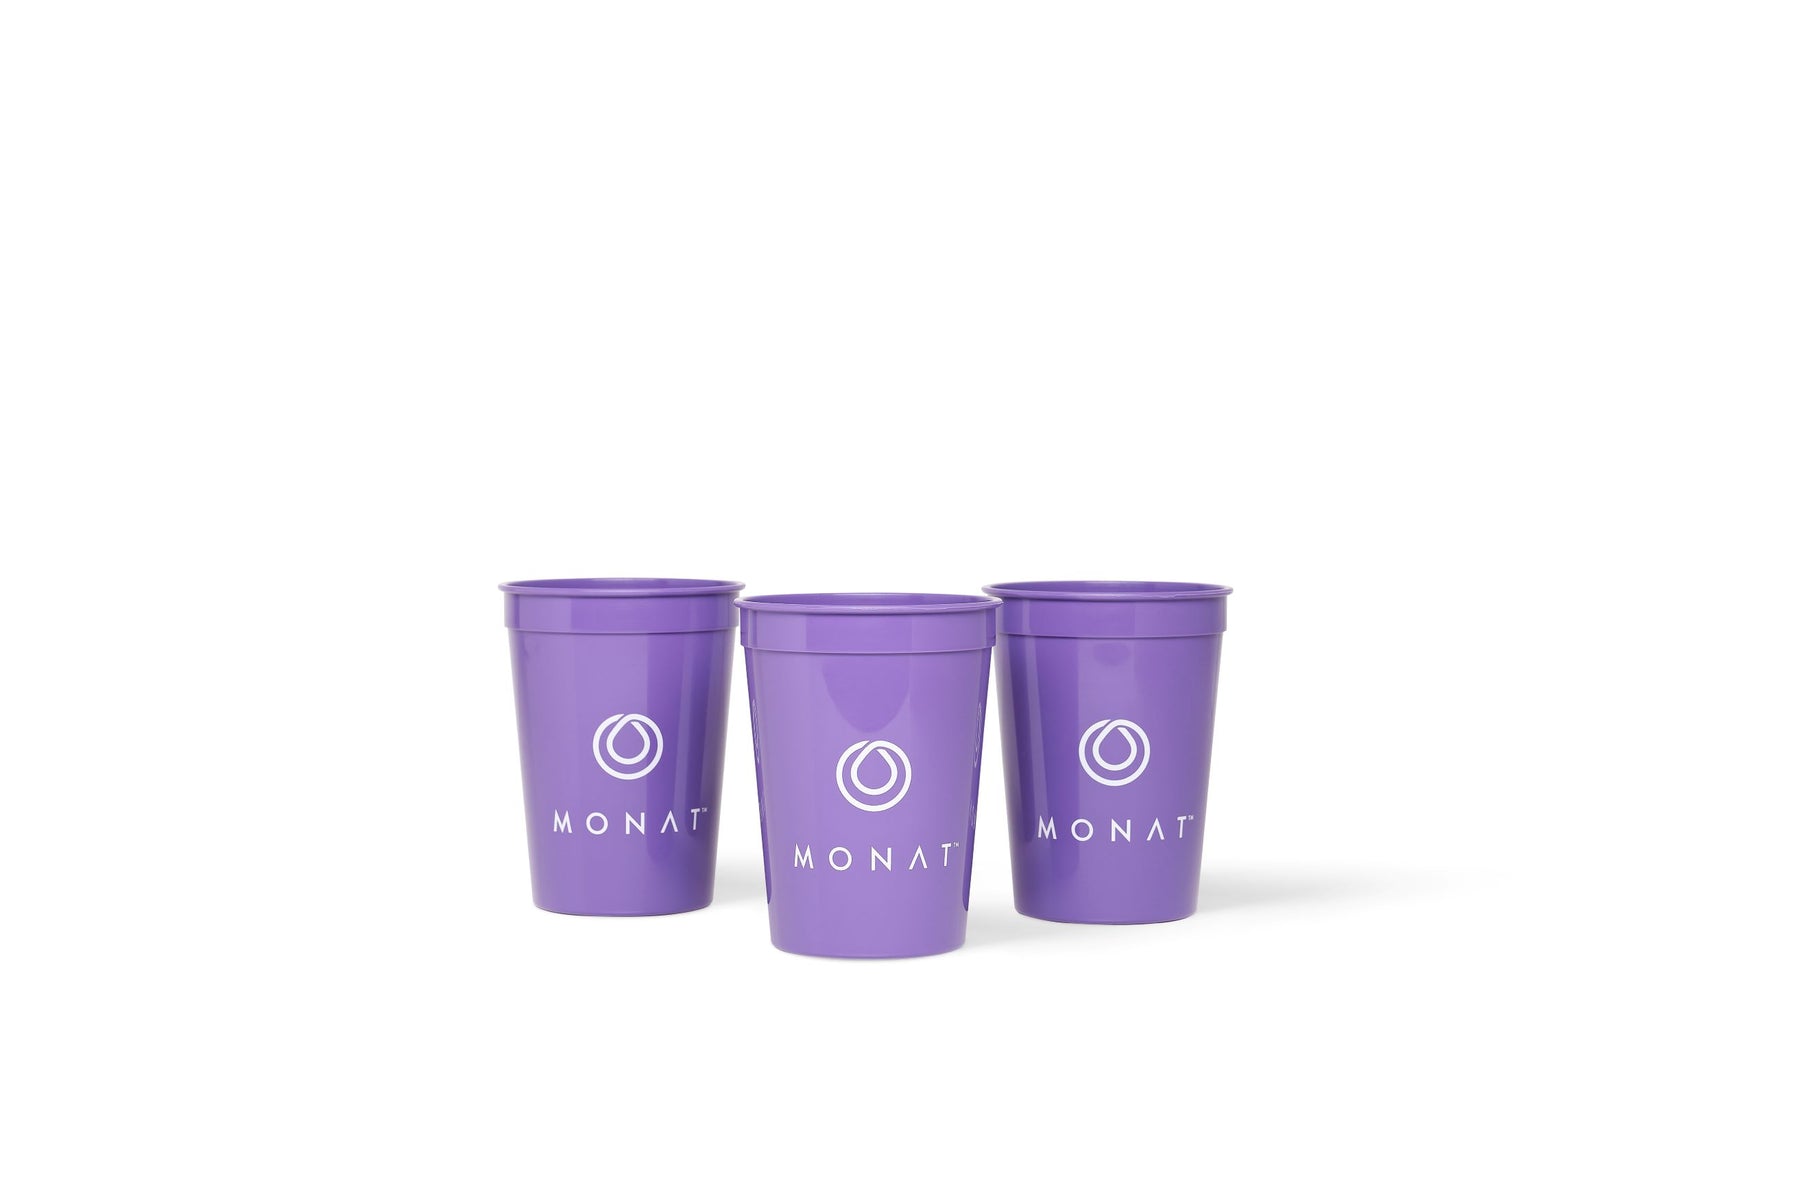 MONAT Branded Reusable Cups (pack of 3) - MONAT Gear